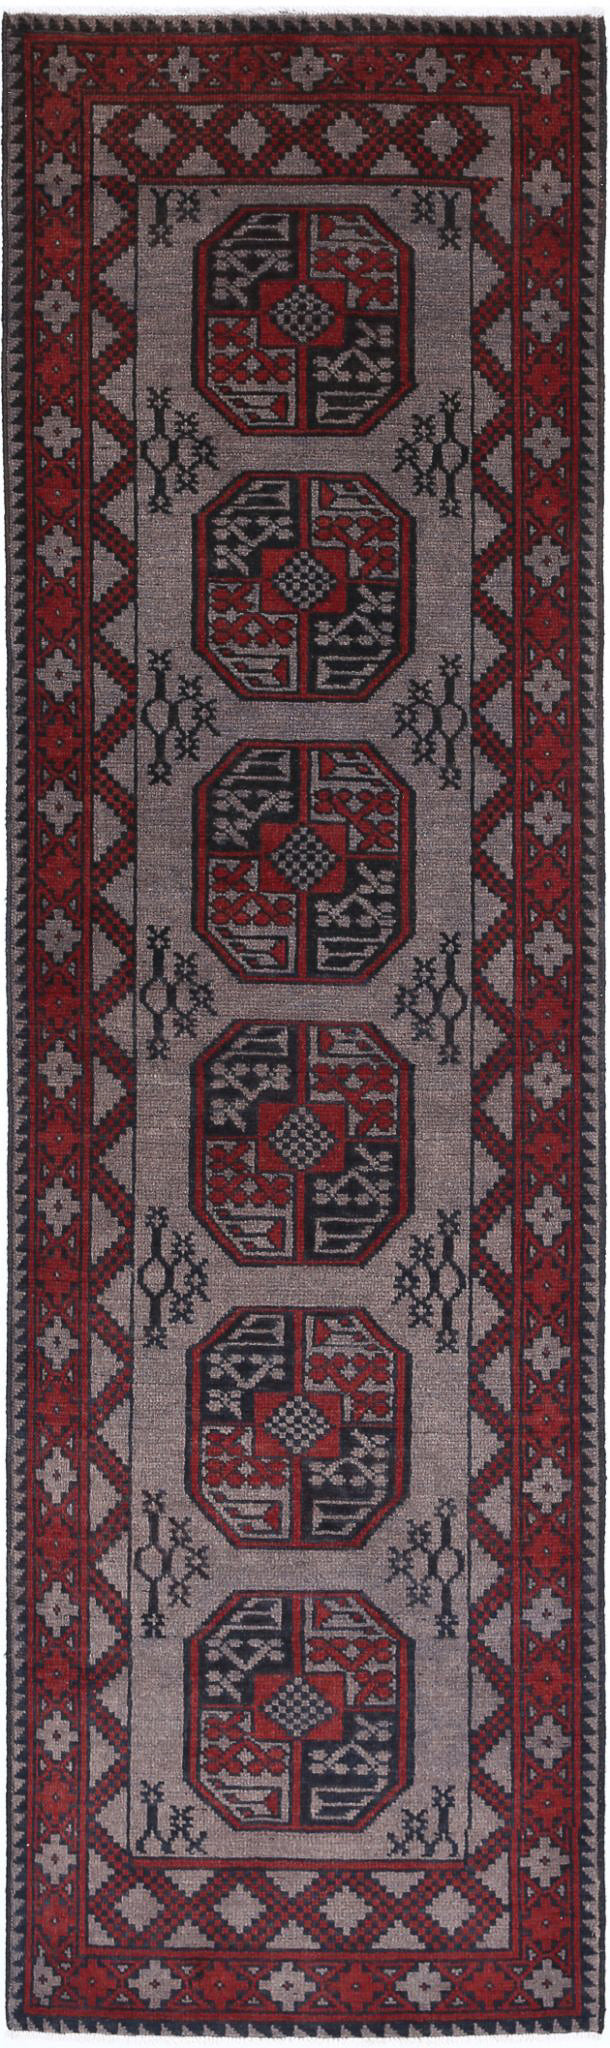 Revival-hand-knotted-gul-collection-wool-rug-5013988.jpg